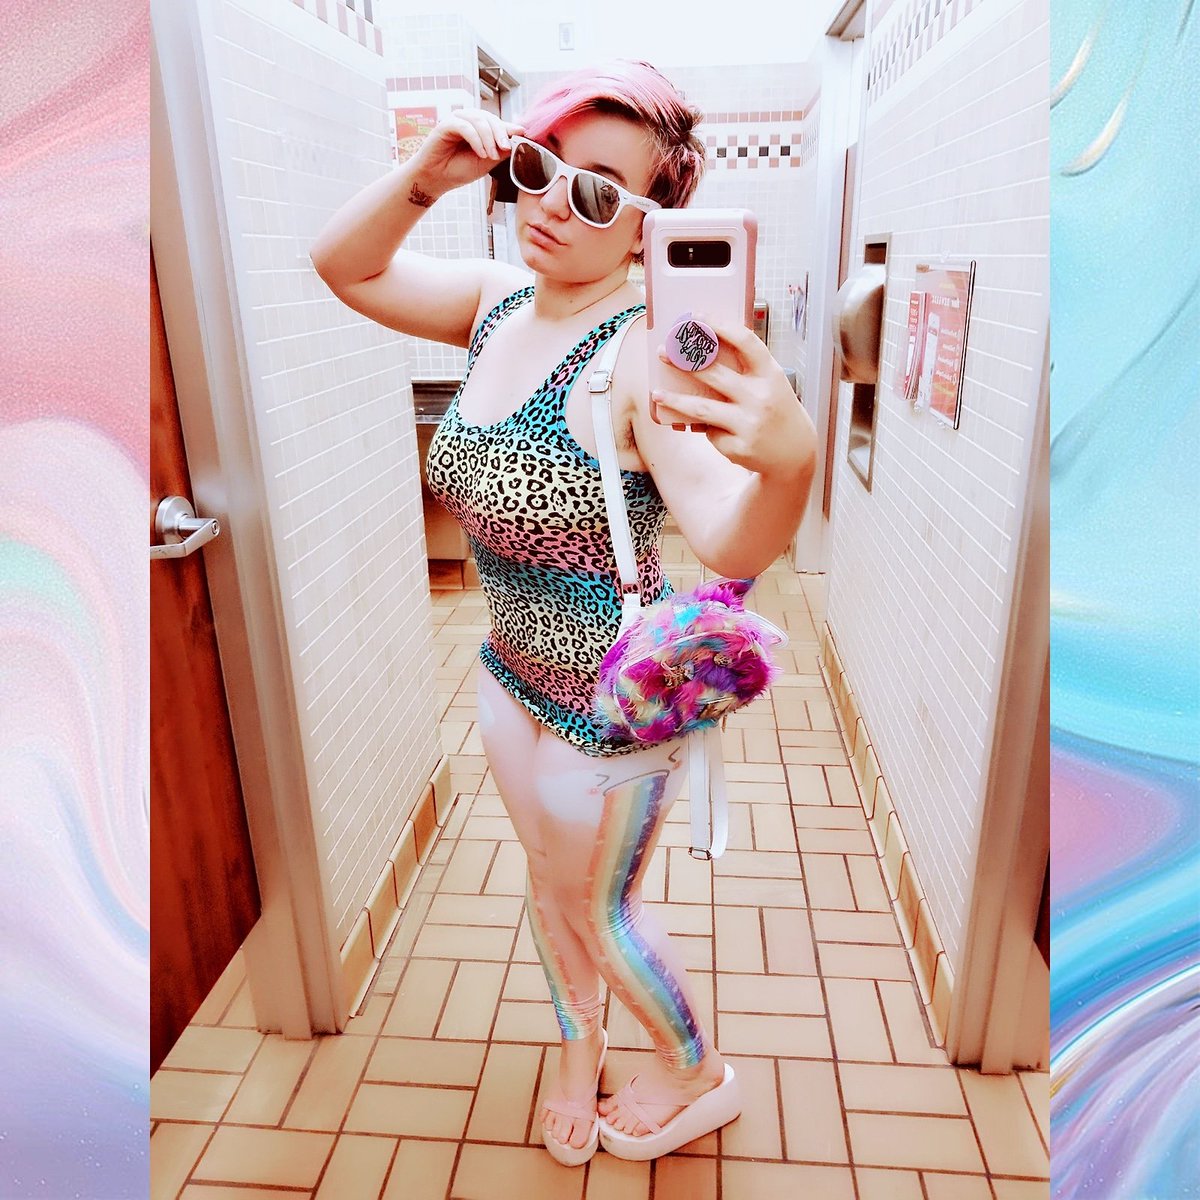 RT @NoelCypress 'Weeb trash but hey i look good. On my way to #animemidwest to be at the @pixelvixens booth and perform at our panels! Be sure to come see me and say hi! Also damn look at my weight loss progress!
#yogapants #leggingsarepants #harajuku
💖